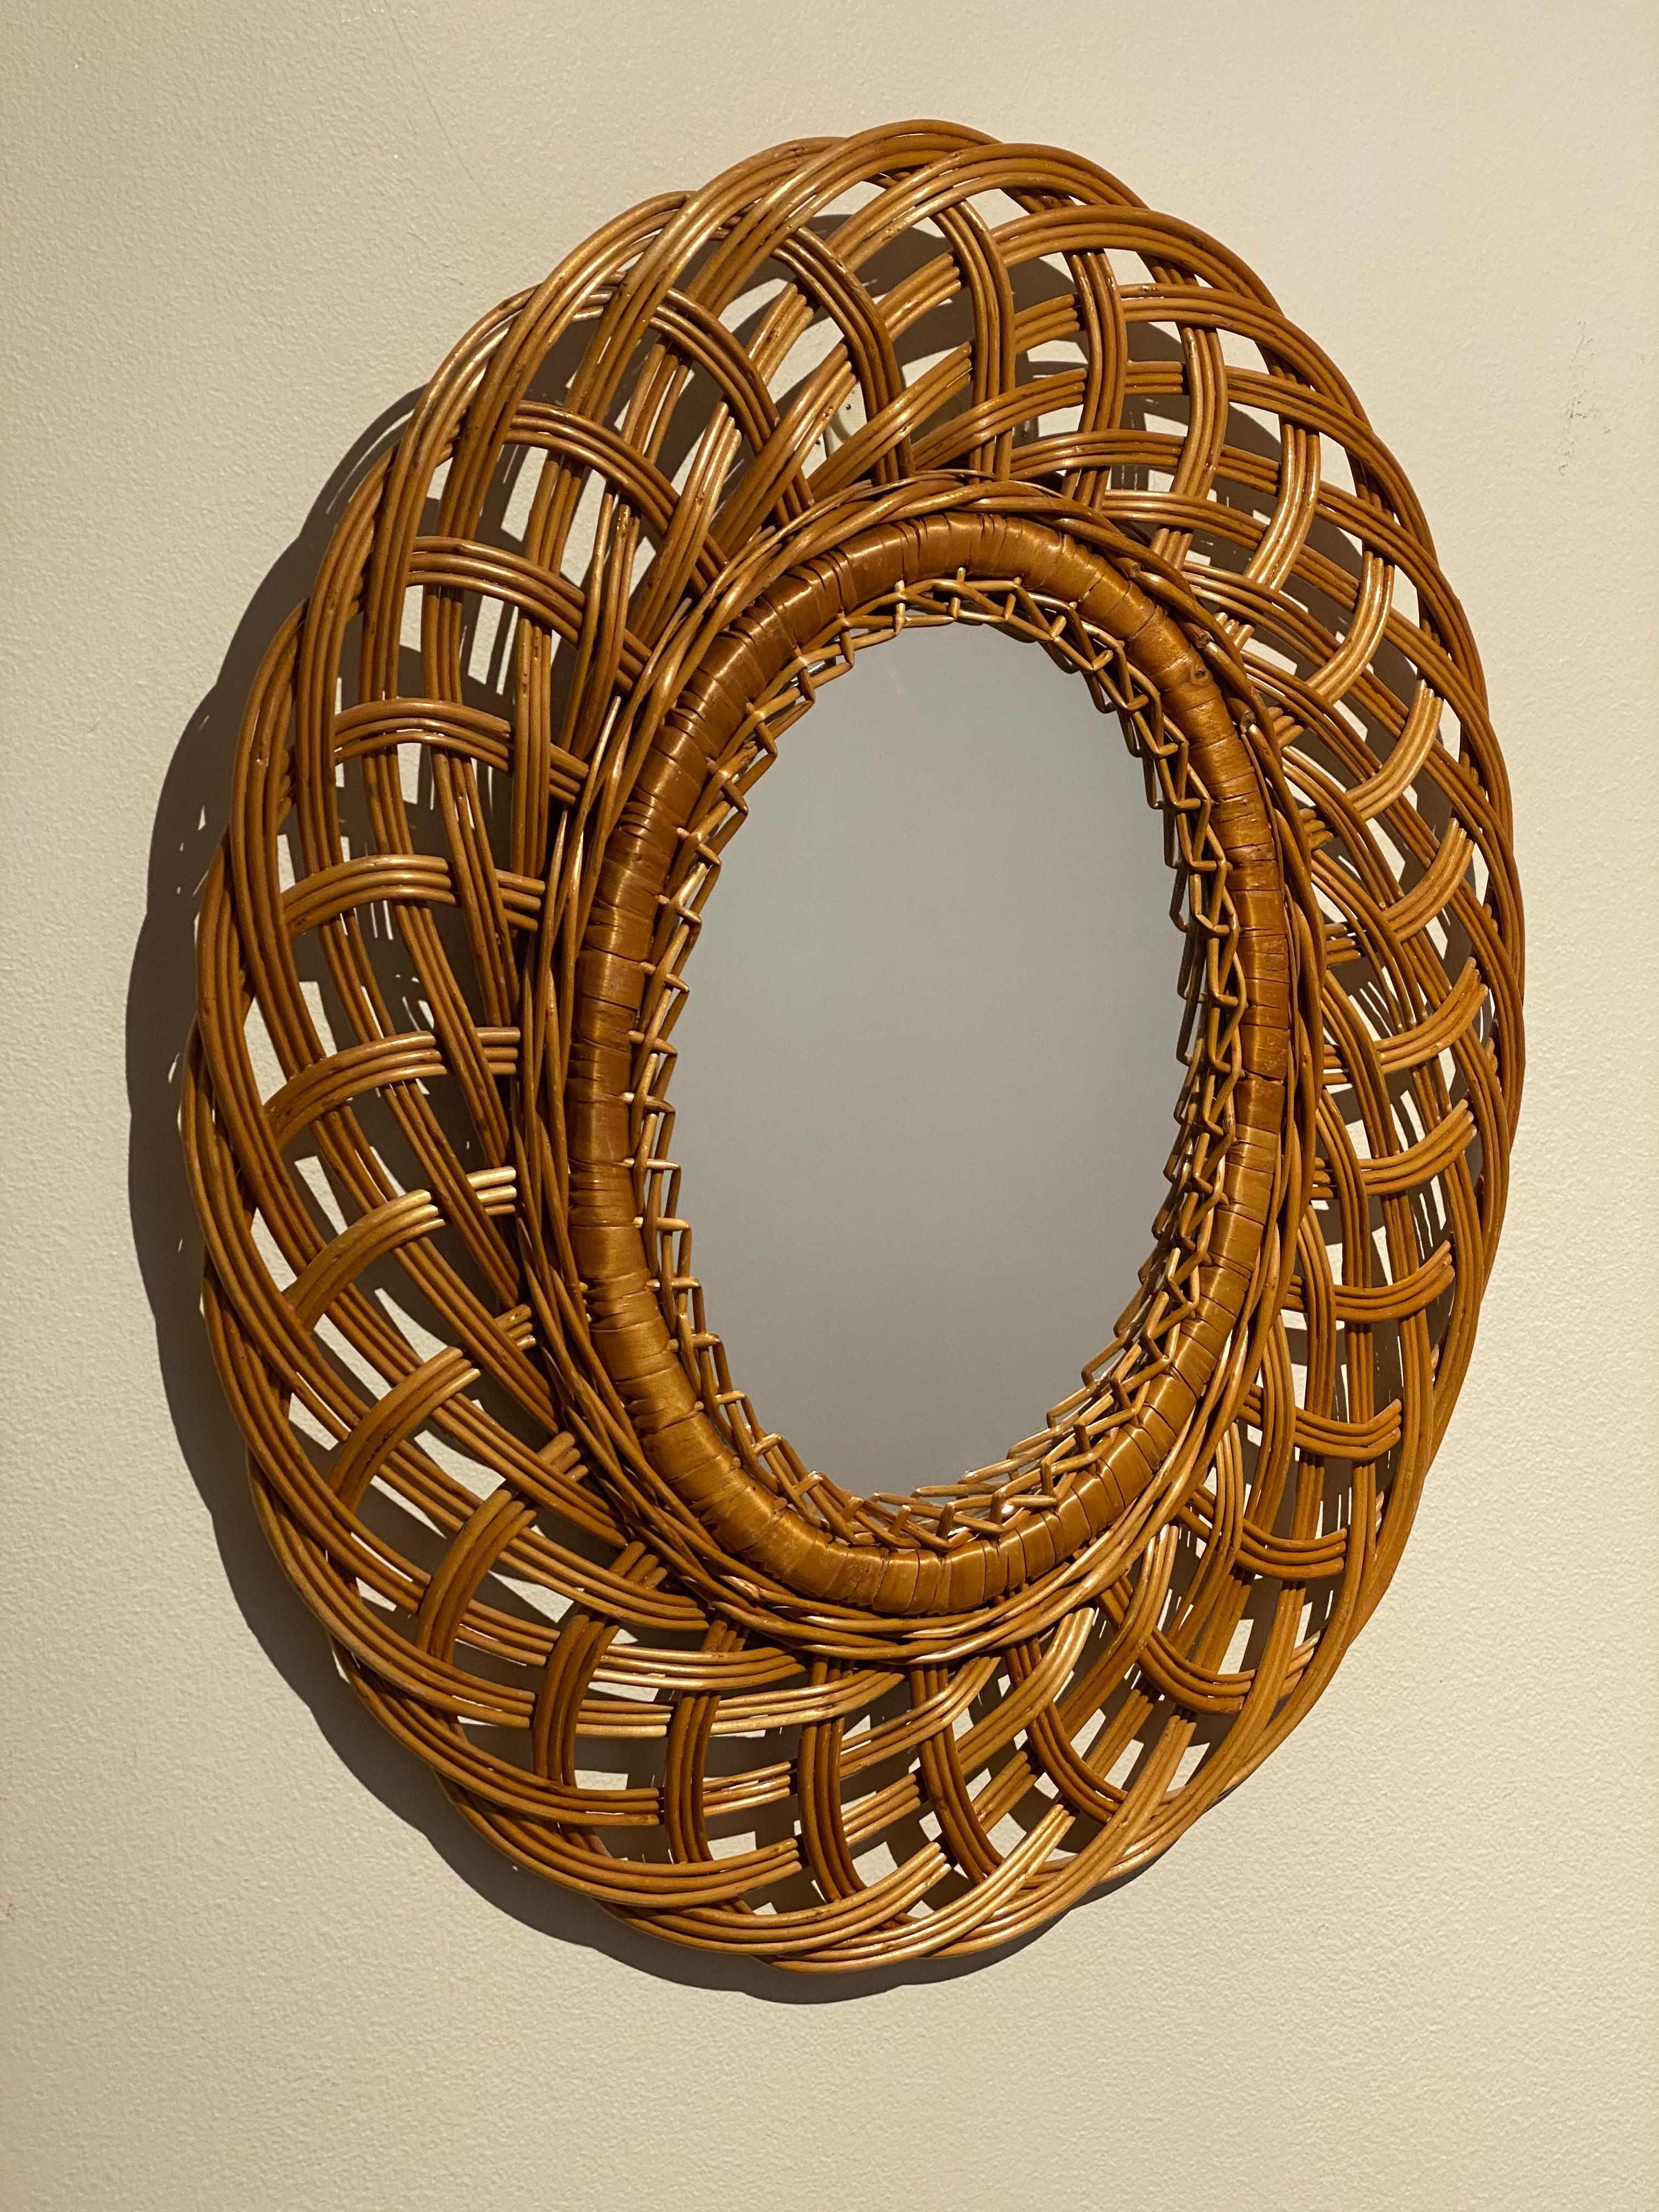 A small and light wall mirror, in woven wicker, Swedish, 1960s.

Other designers of the period include Josef Frank, Fontana Arte, and Line Vautrin.